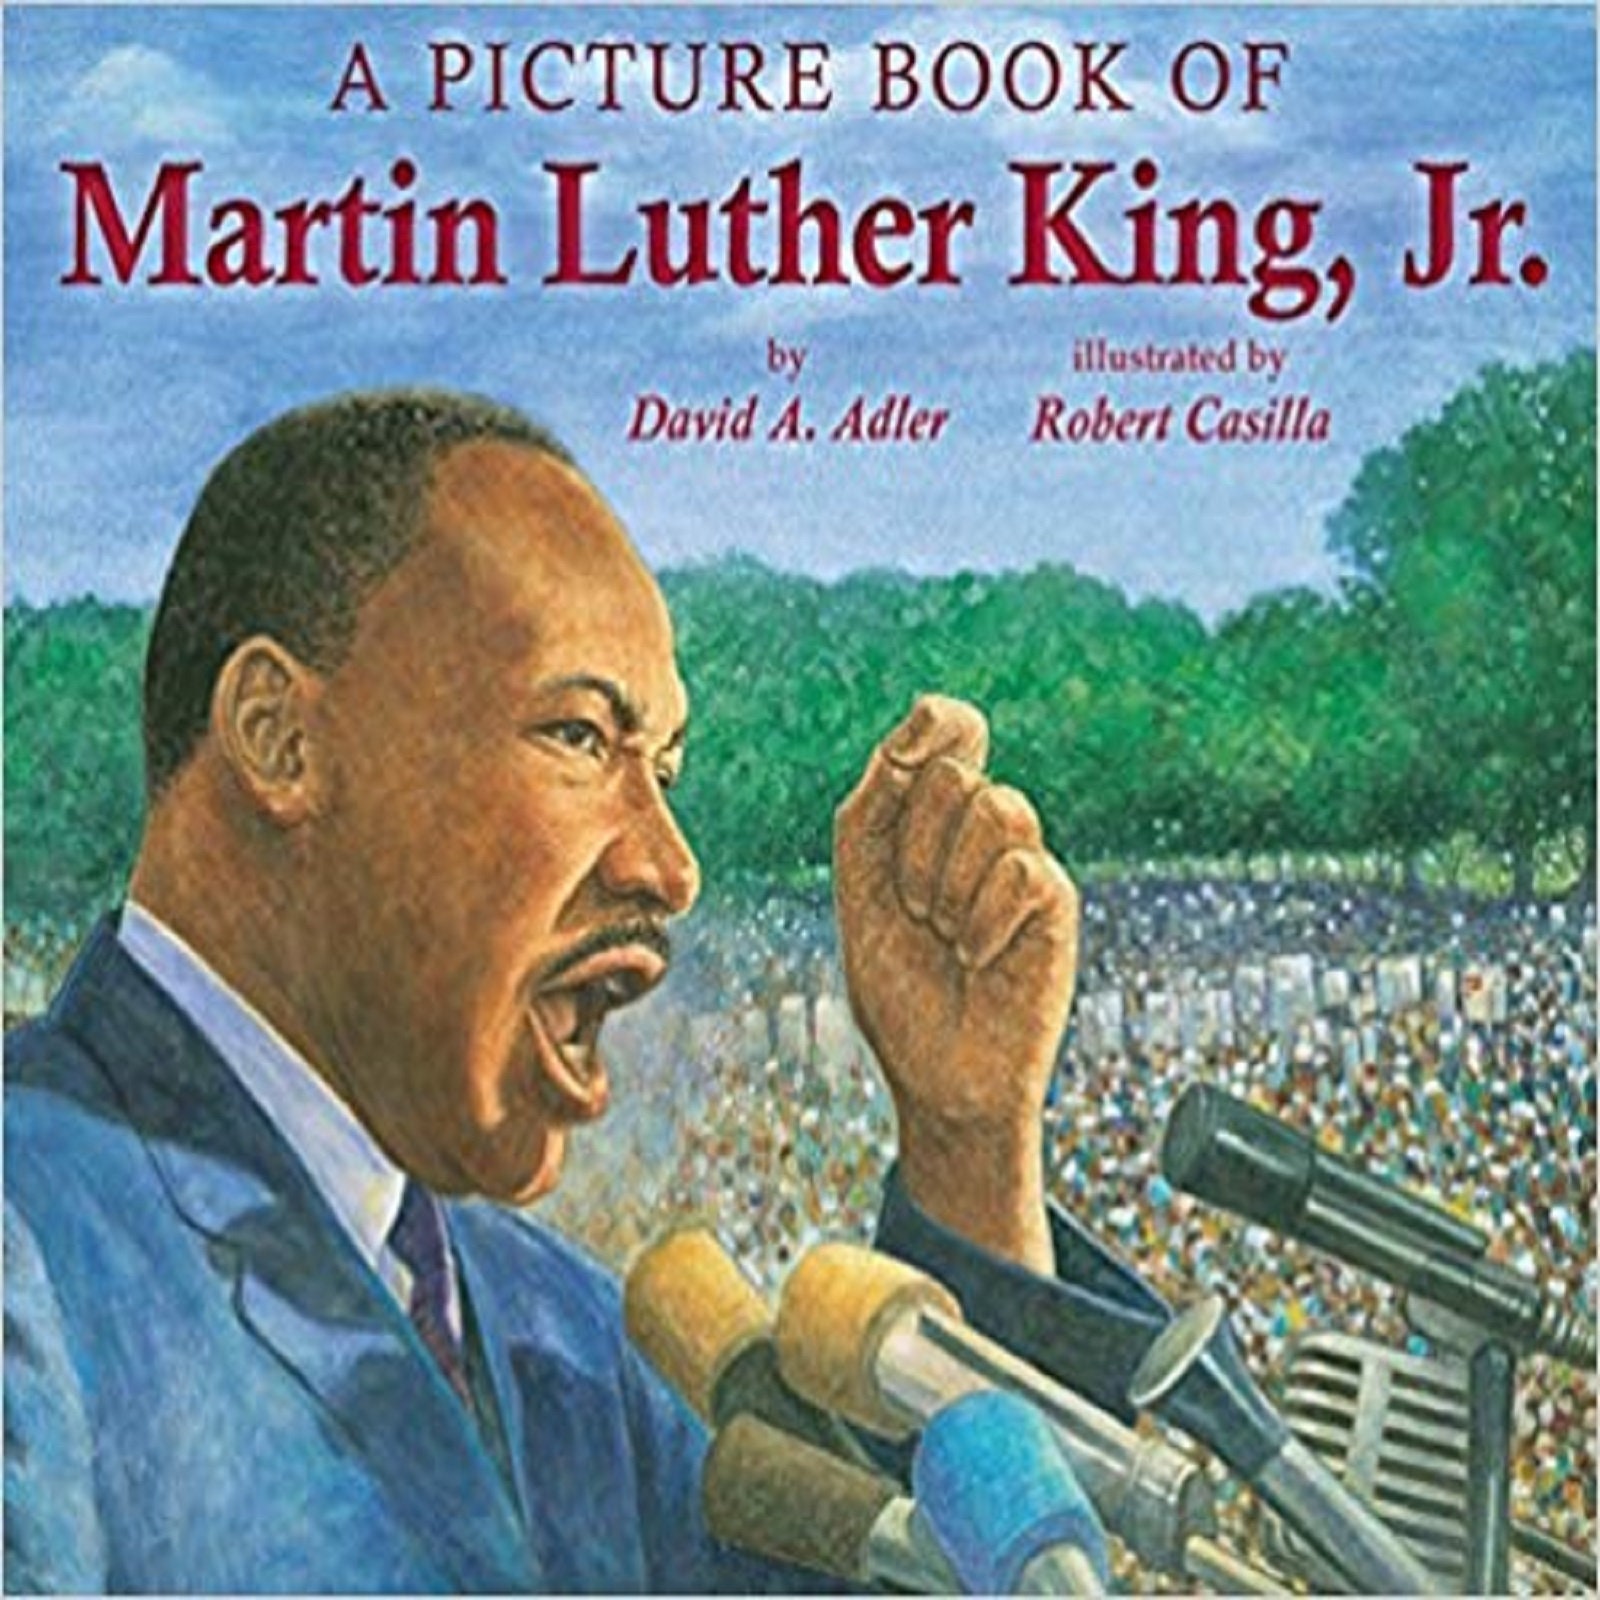 summary biography of martin luther king jr